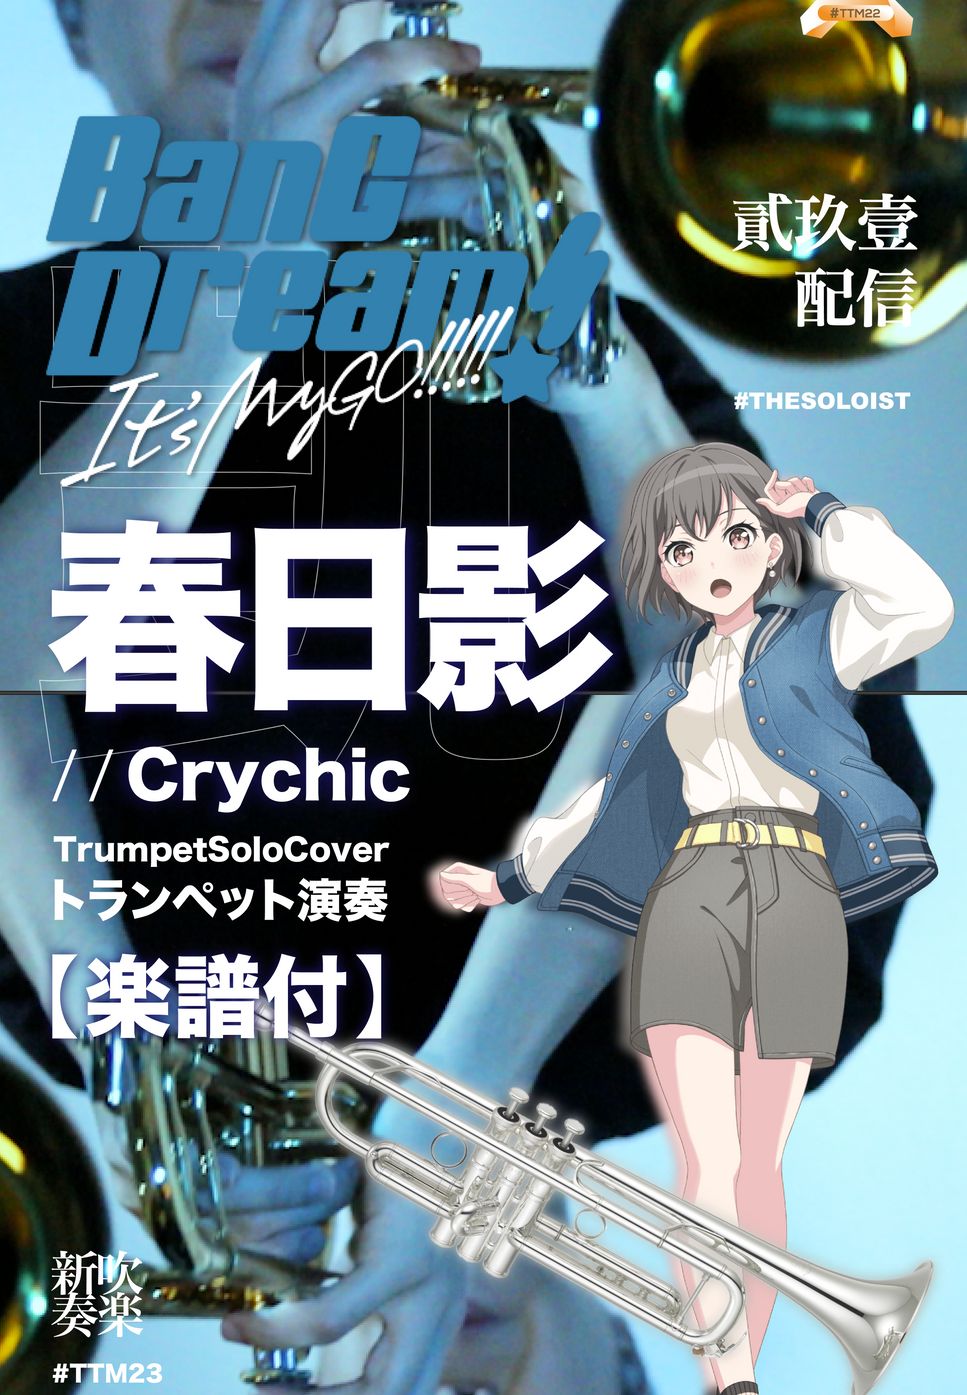 Crychic - Haruhikage (C/ Bb/ F/ Eb Solo Sheet Music) by 凱